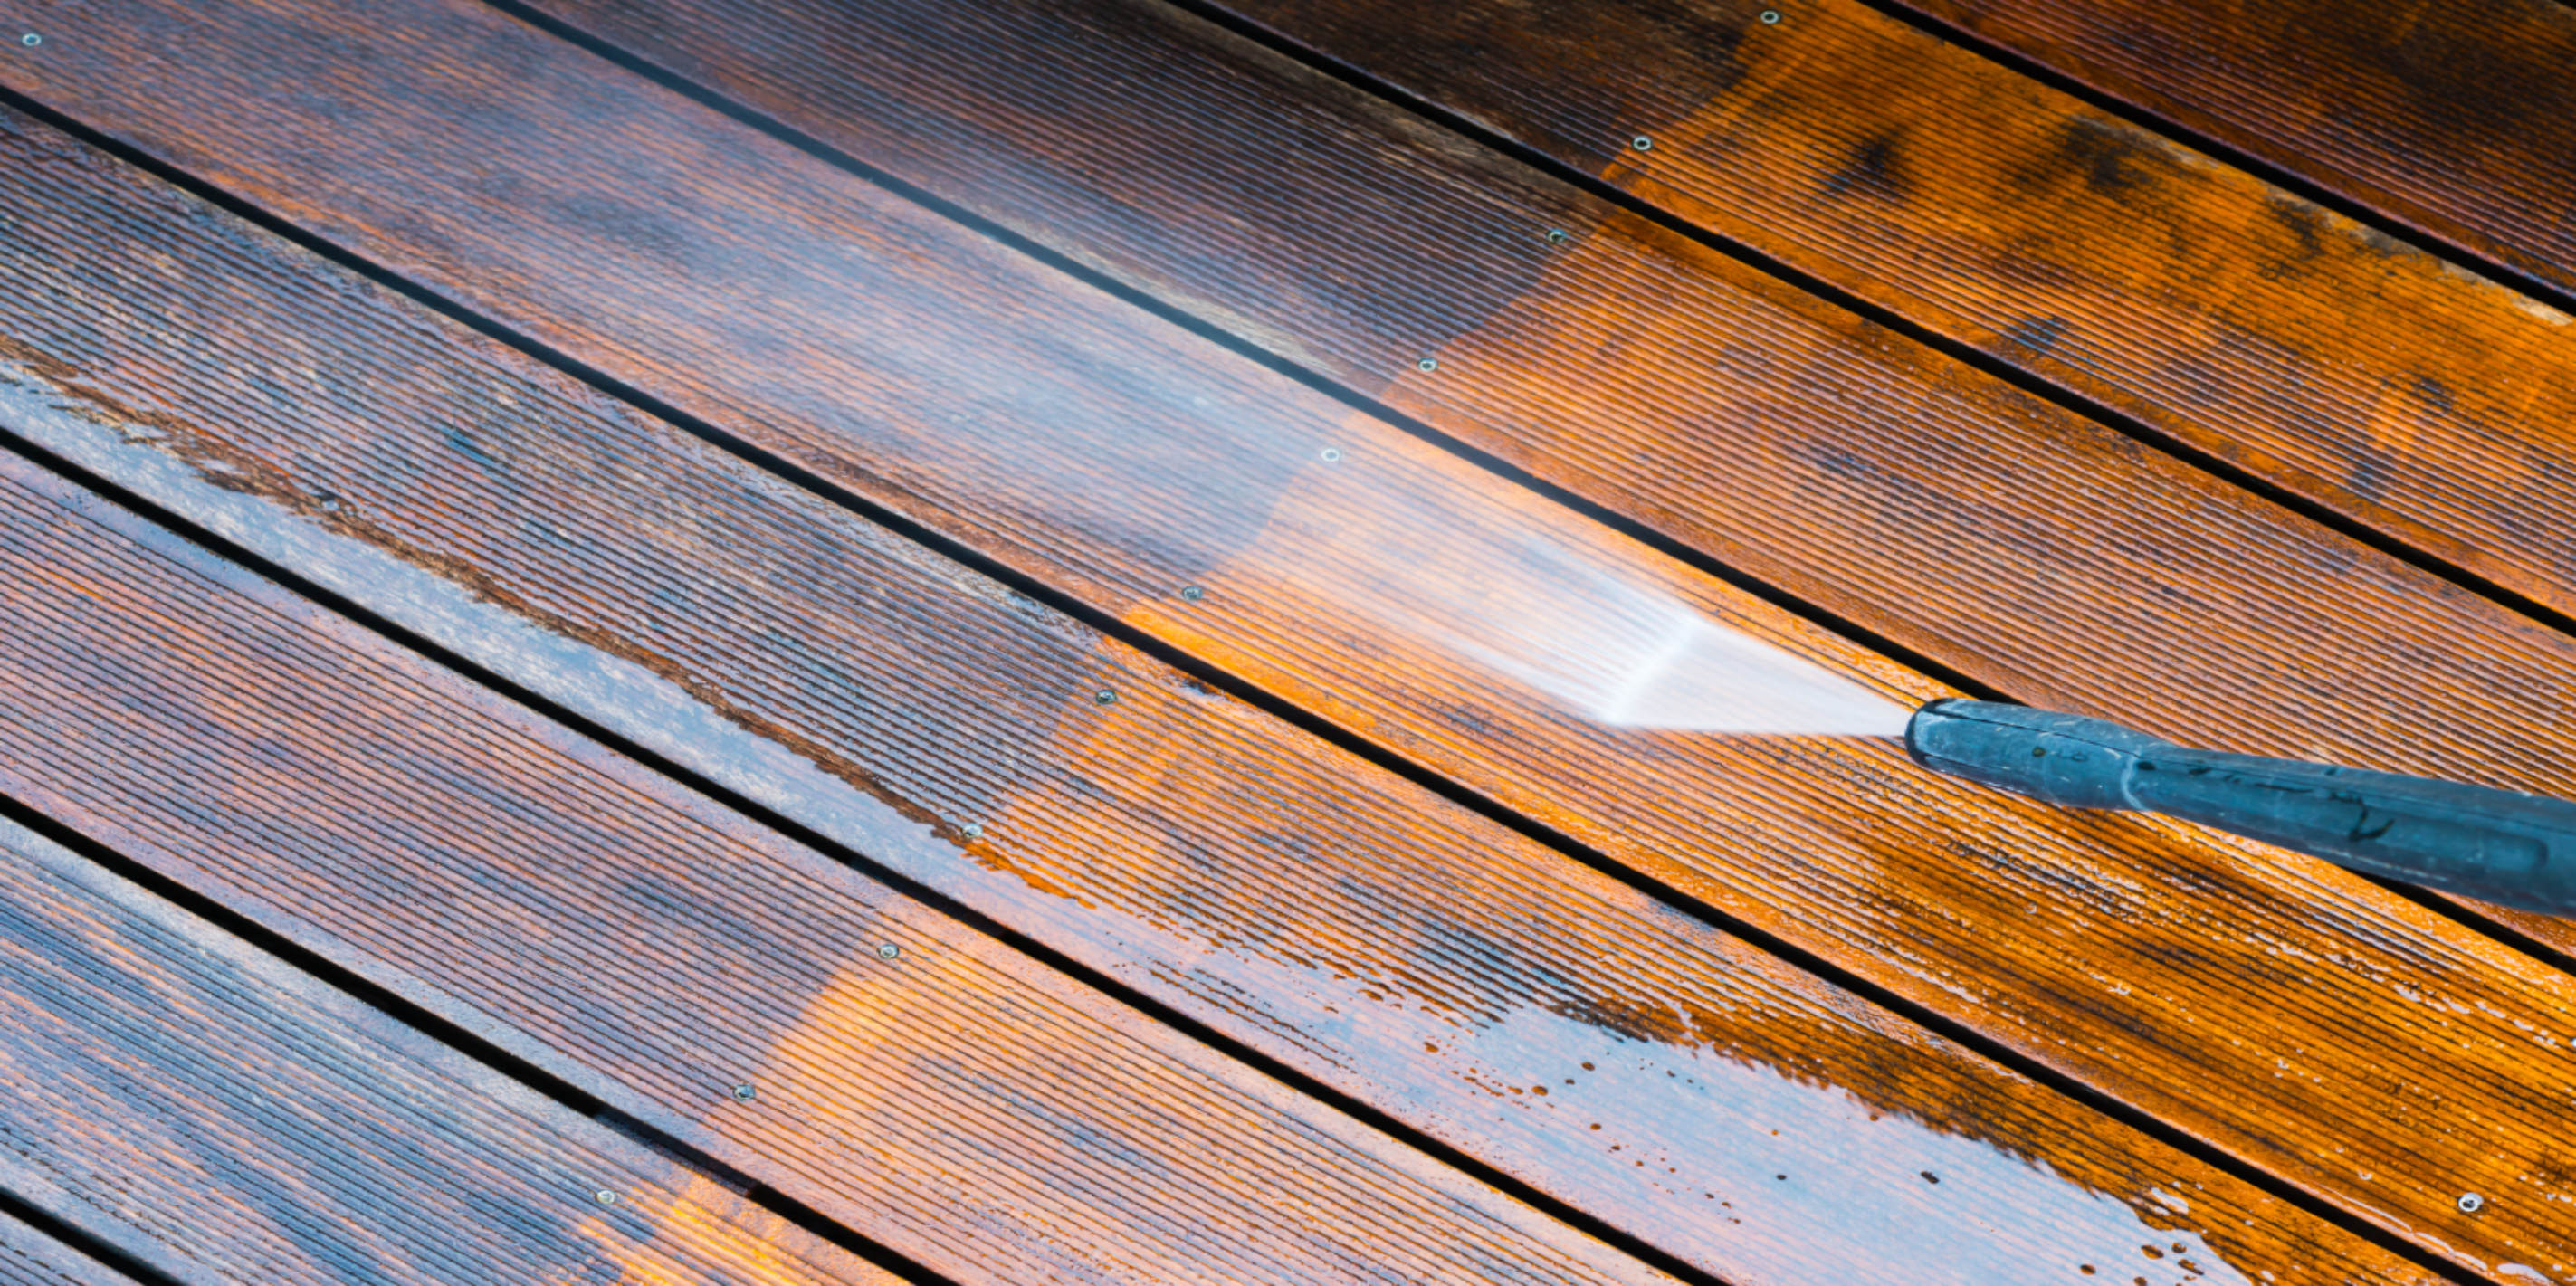 The wood of a deck being pressure washed, with one half already done and the other in the process of being washed.